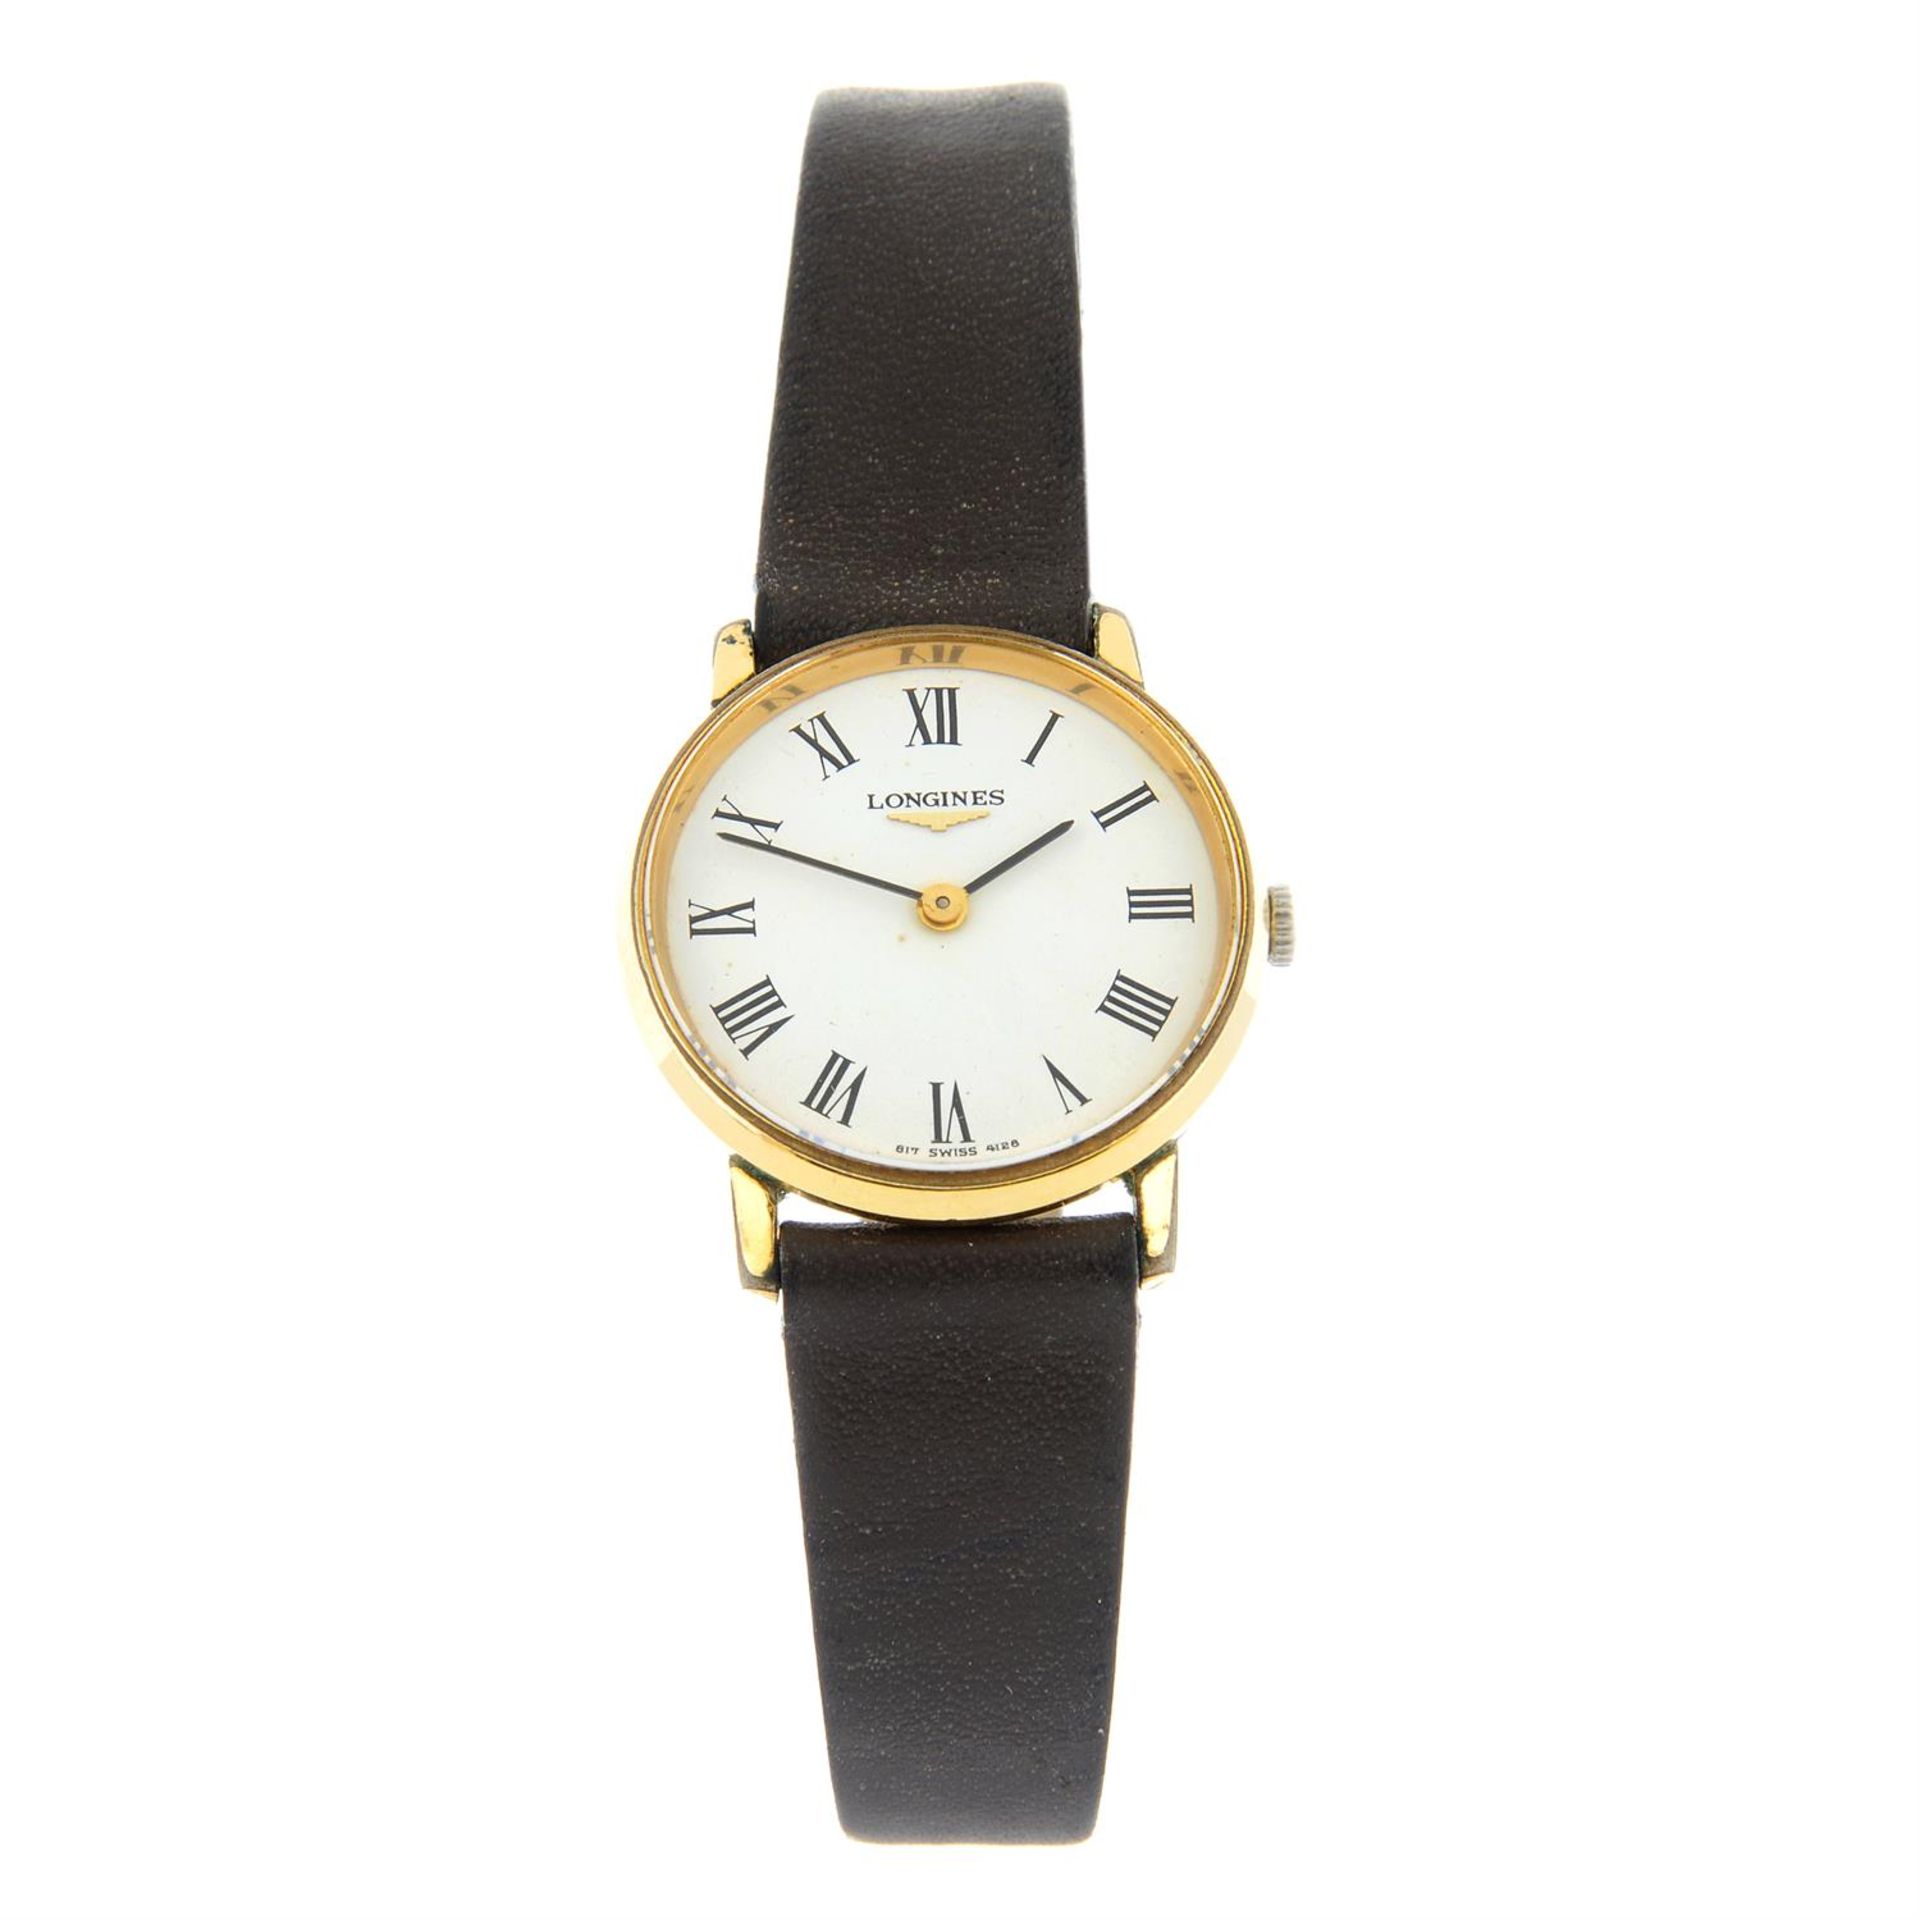 LONGINES - a gold plated wrist watch, 25mm